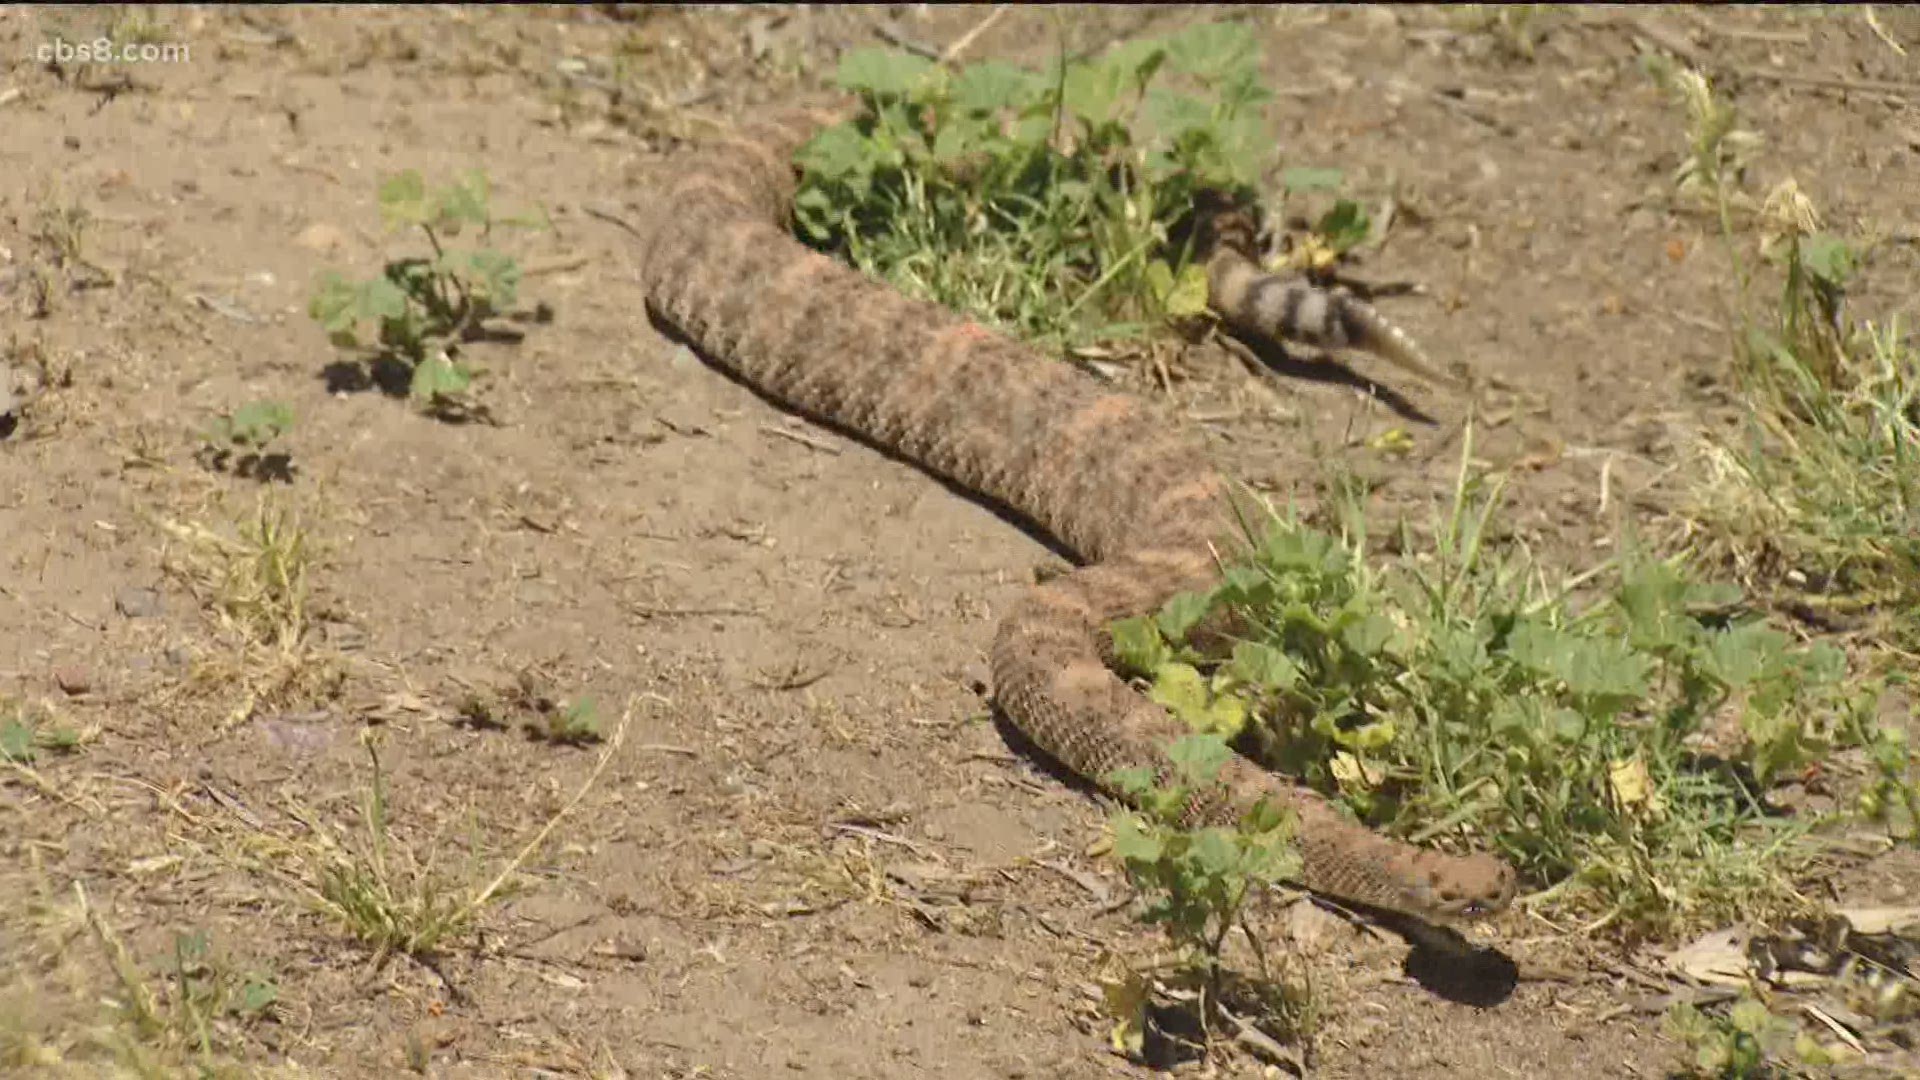 A Poway woman spent three days in the ICU after a rattle snake bit her in late April.